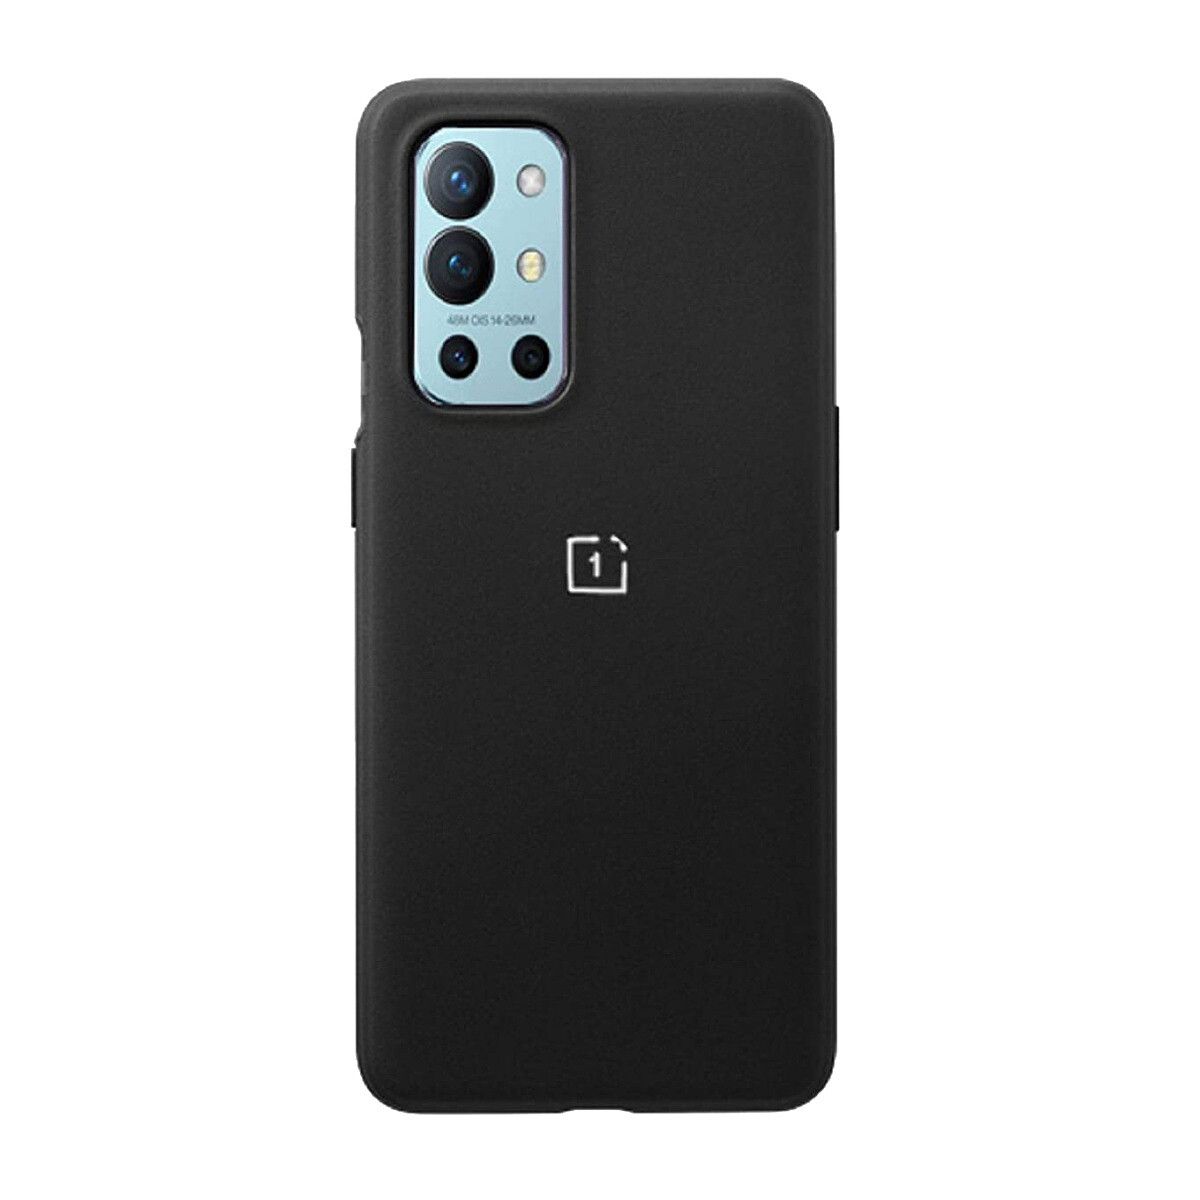 If you want the most basic protection for your OnePlus 9R without overloading it, a silicone case like the one from Winble is ideal. Looks simple and elegant, and comes in multiple colors.